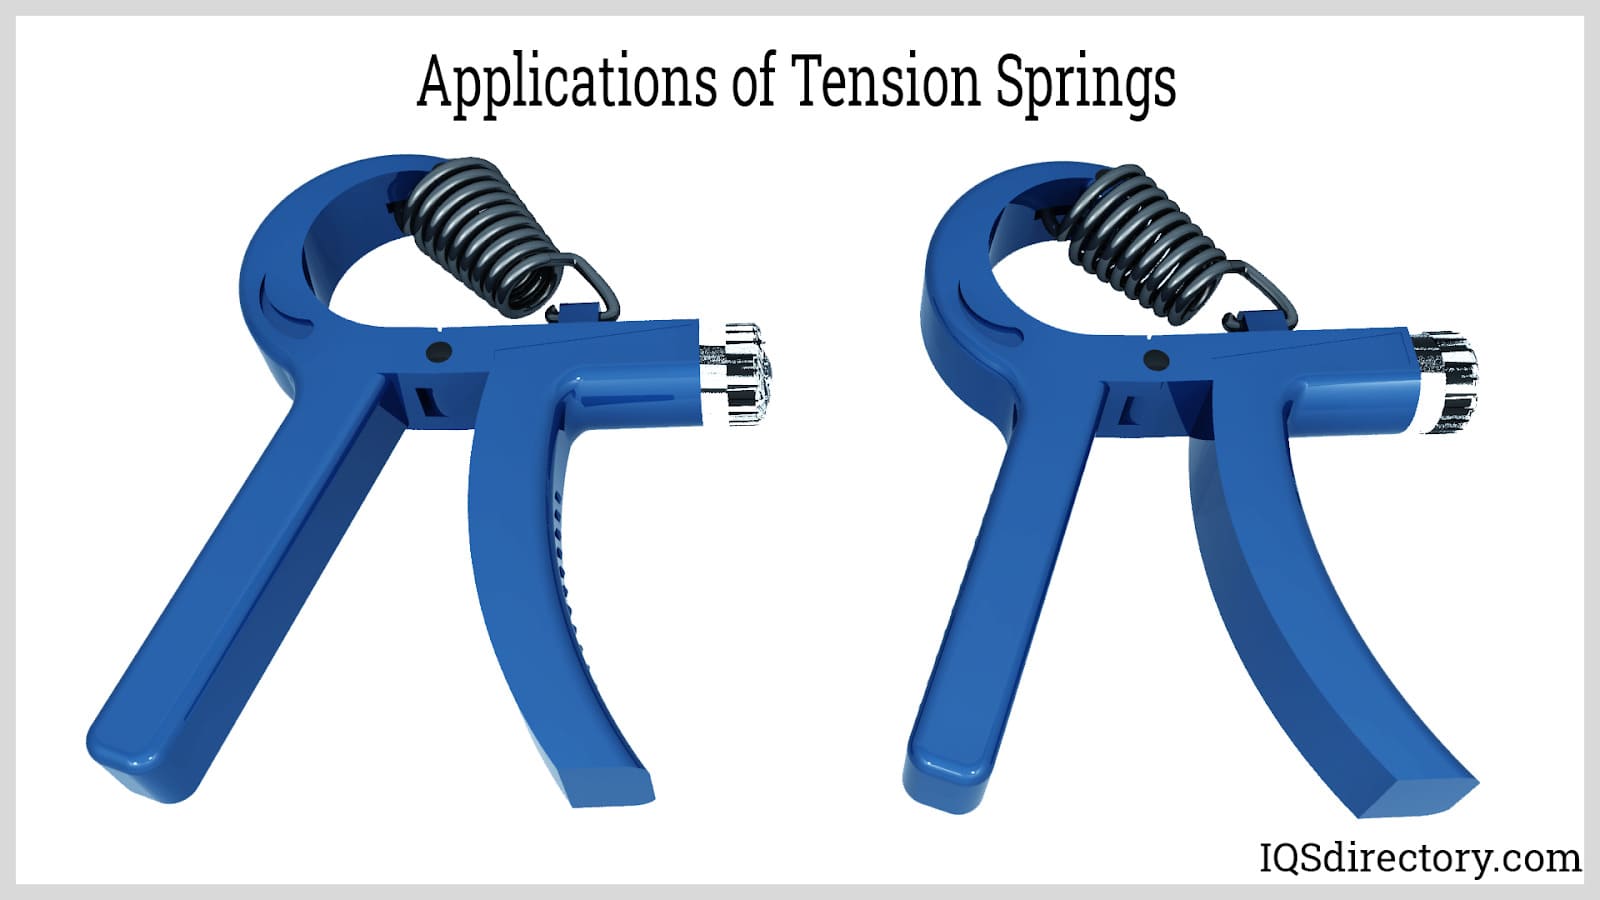 Applications of Tension Springs